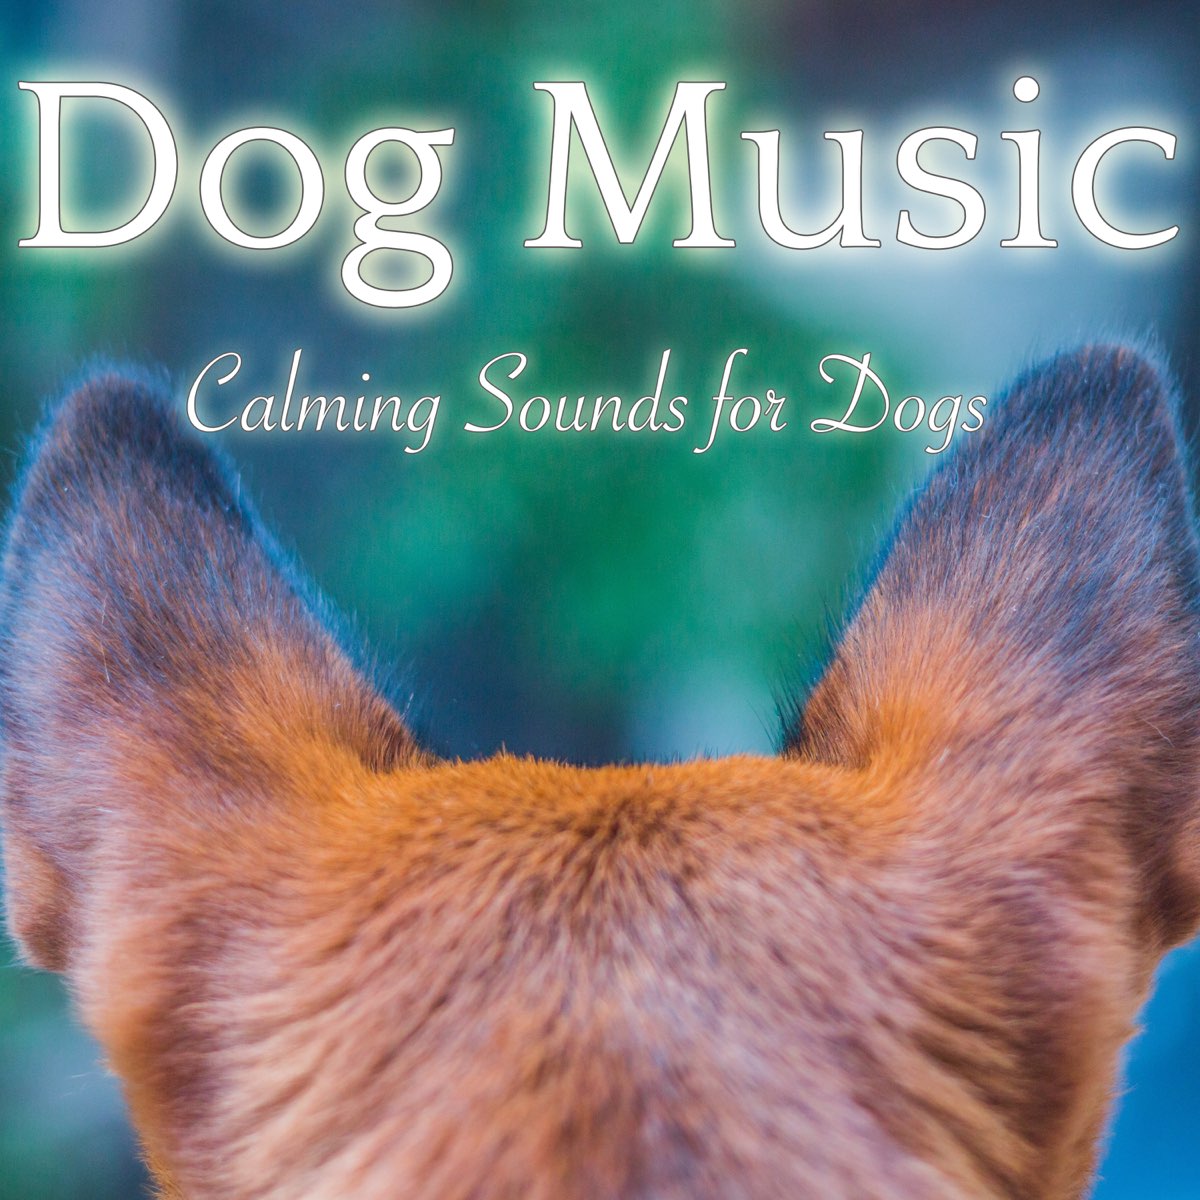 ‎Dog Music - Calming Sounds for Dogs: Relaxation and Sleeping Music for ...